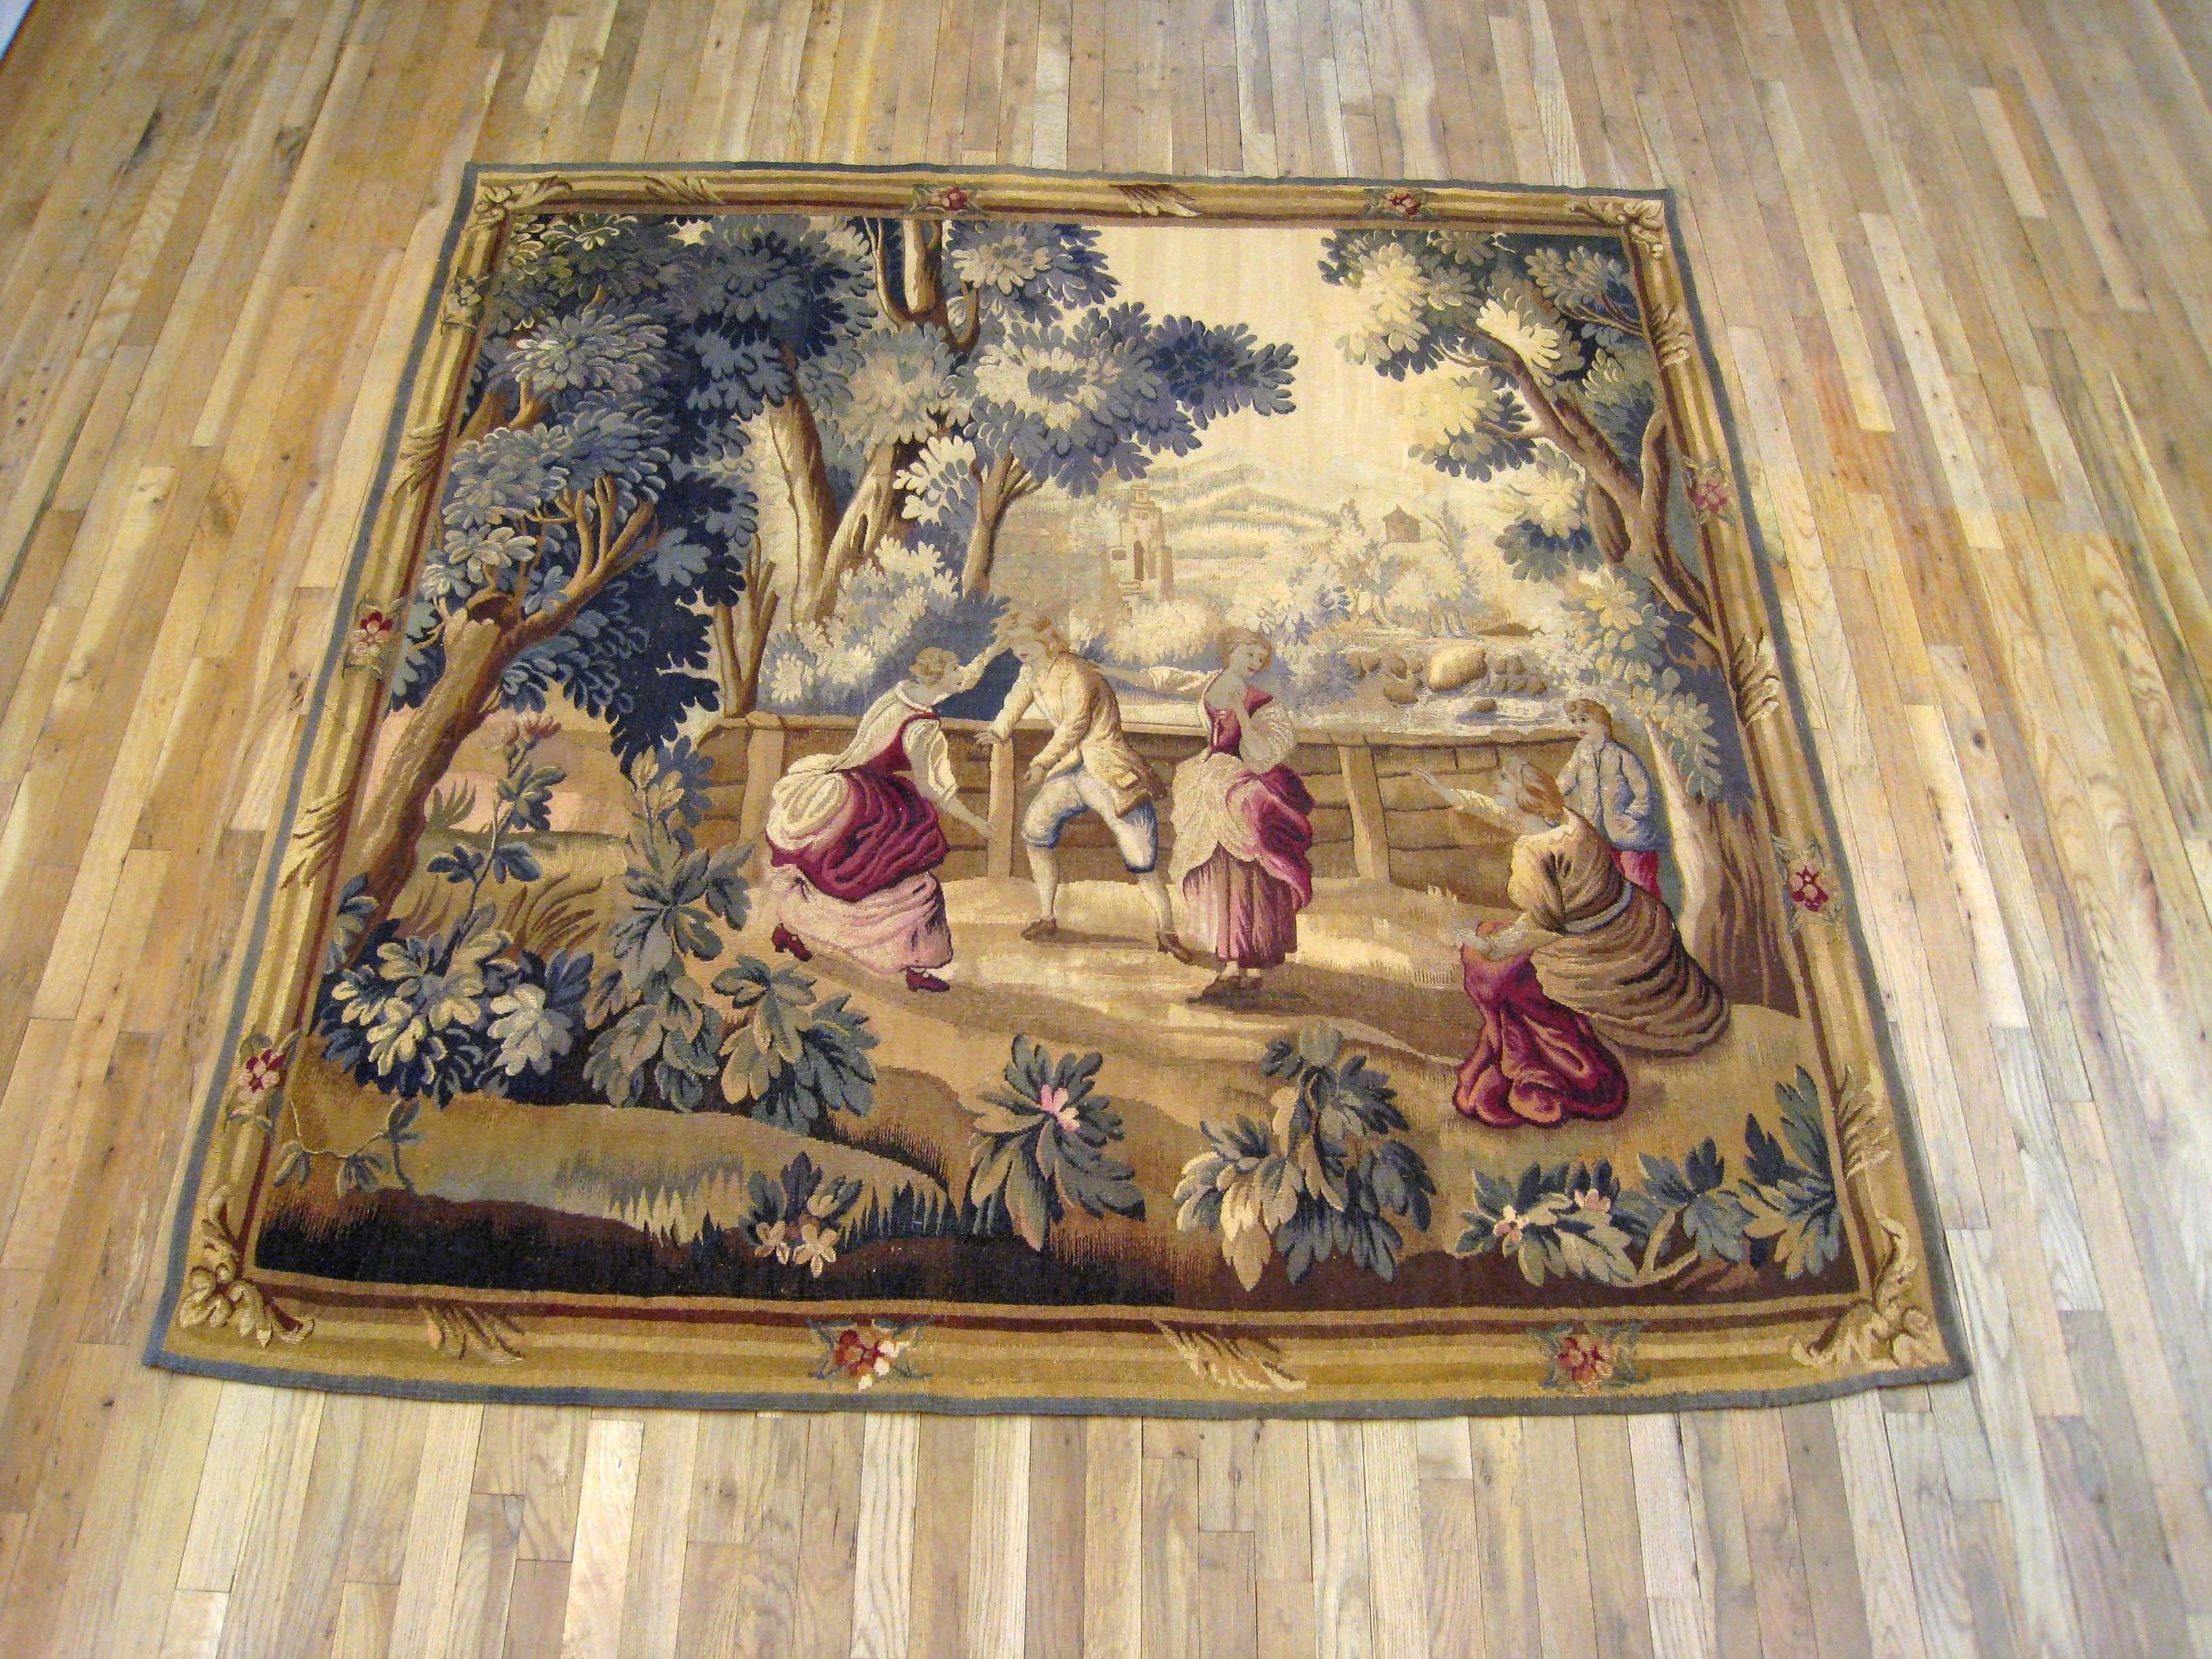 A French Aubusson rustic tapestry from the late 19th century, 'Le Jeu de Colin-Maillard', ('The Blind Man’s Buff') after a cartoon by Jean-Baptiste Huet (1745-1711). This tapestry was part of a set of the 'Amusements champêtres', ('The Pastoral